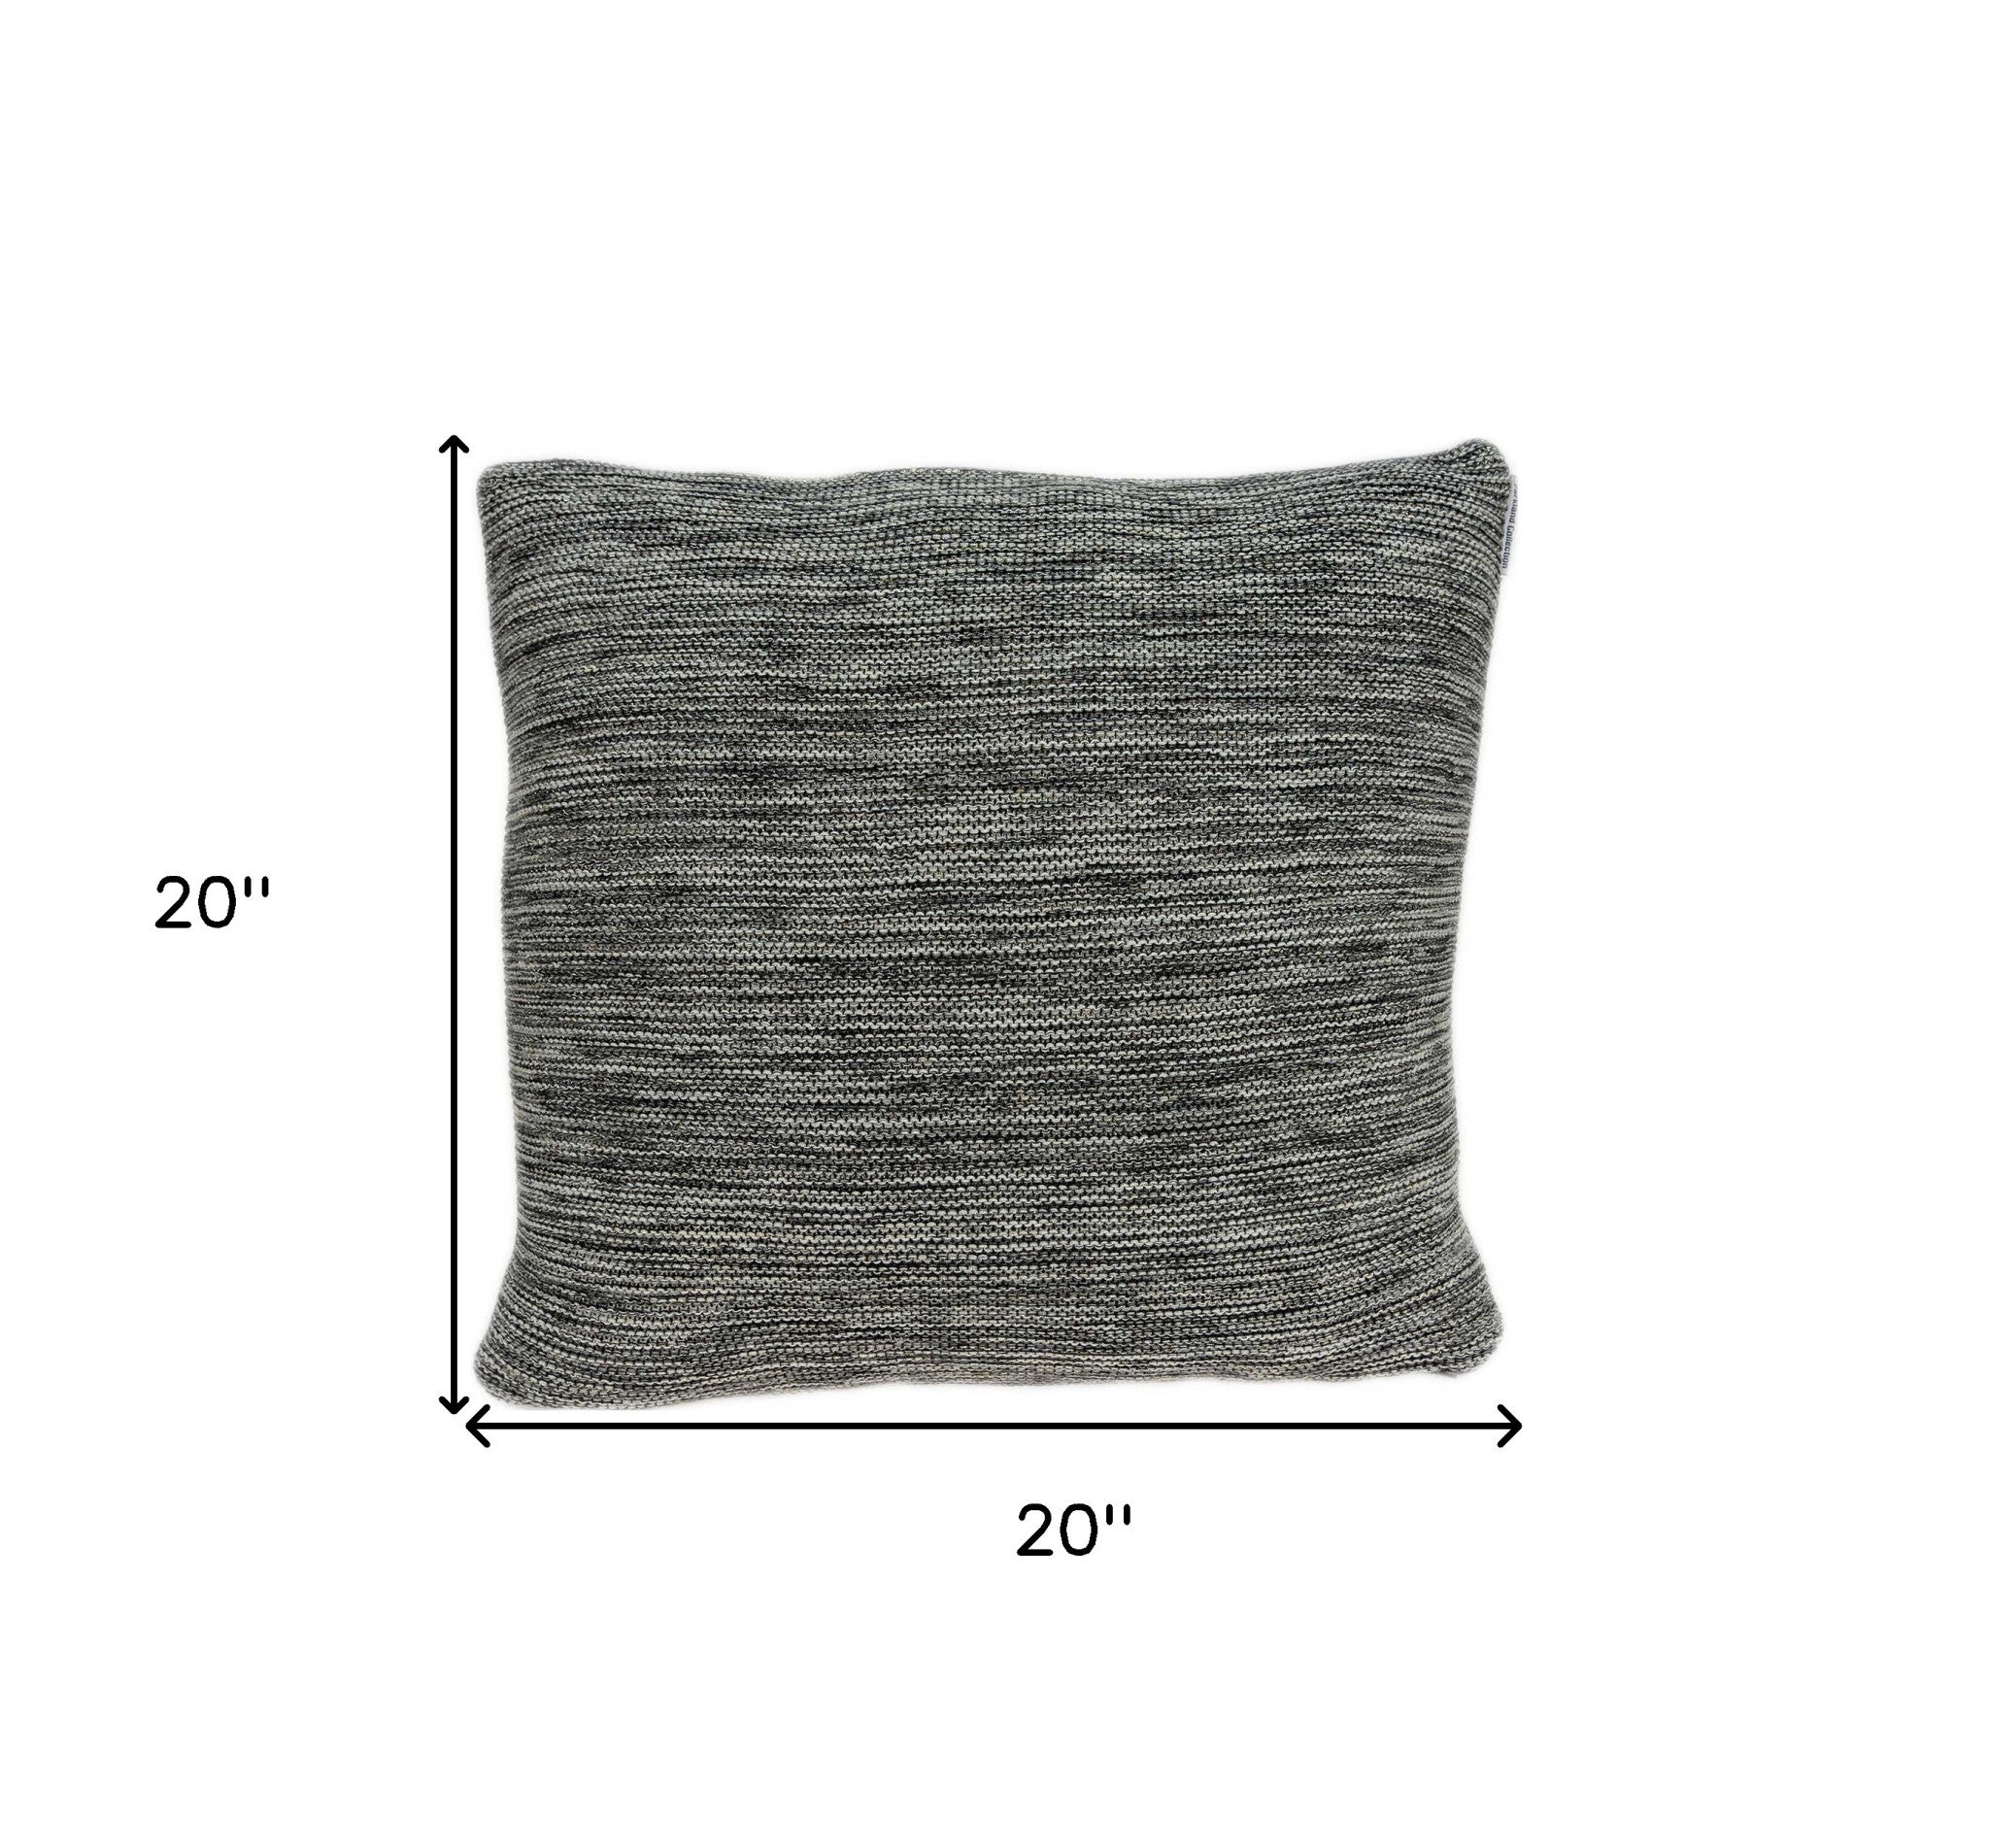 20"X 20" Transitional Heather Gray Cotton Pillow